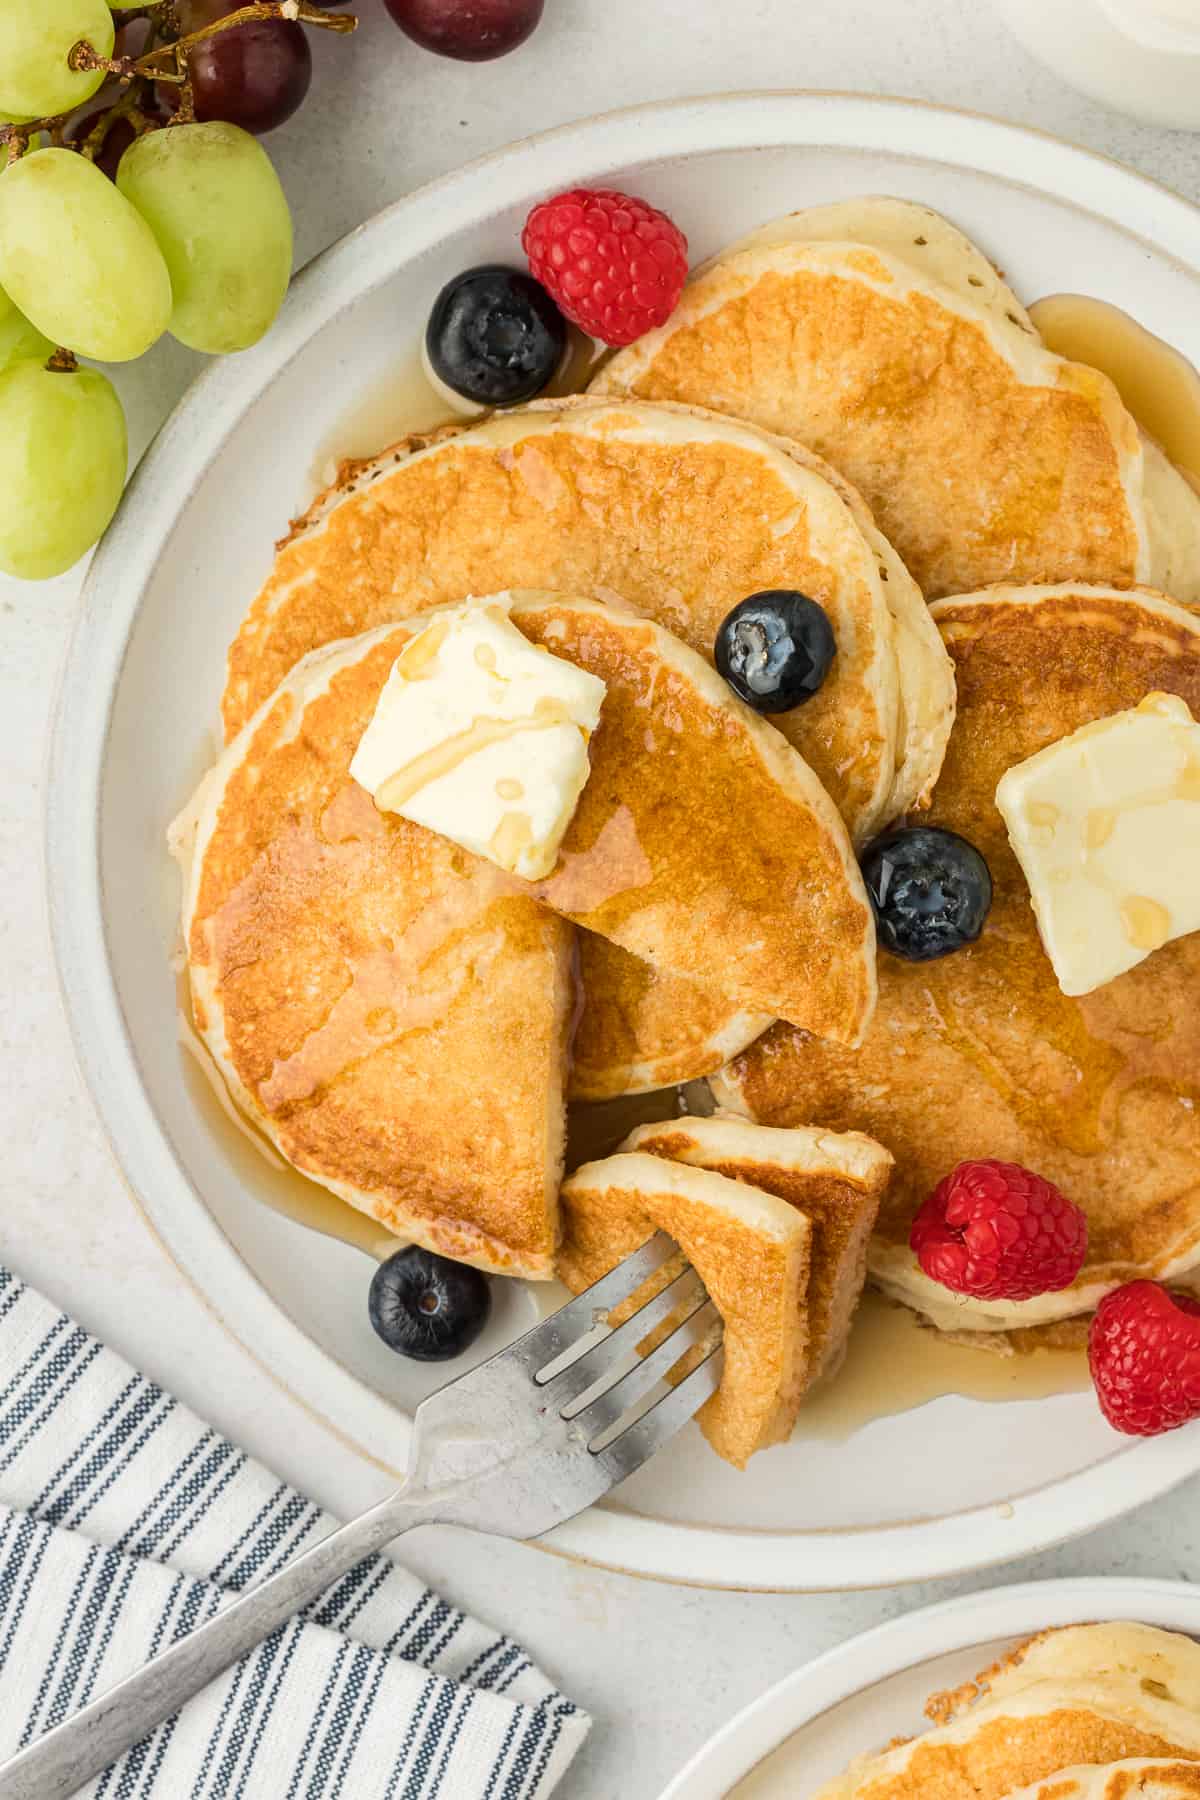 a white plate with four buttermilk pancakes on it, with a triangle-shaped slice out of two pancakes on the tip of a fork that's resting on the plate, fresh blueberries and raspberries, butter slices and drizzles of syrup topping the pancakes, a blue and white striped towel, fresh grapes and another plate of pancakes beside the plate of pancakes